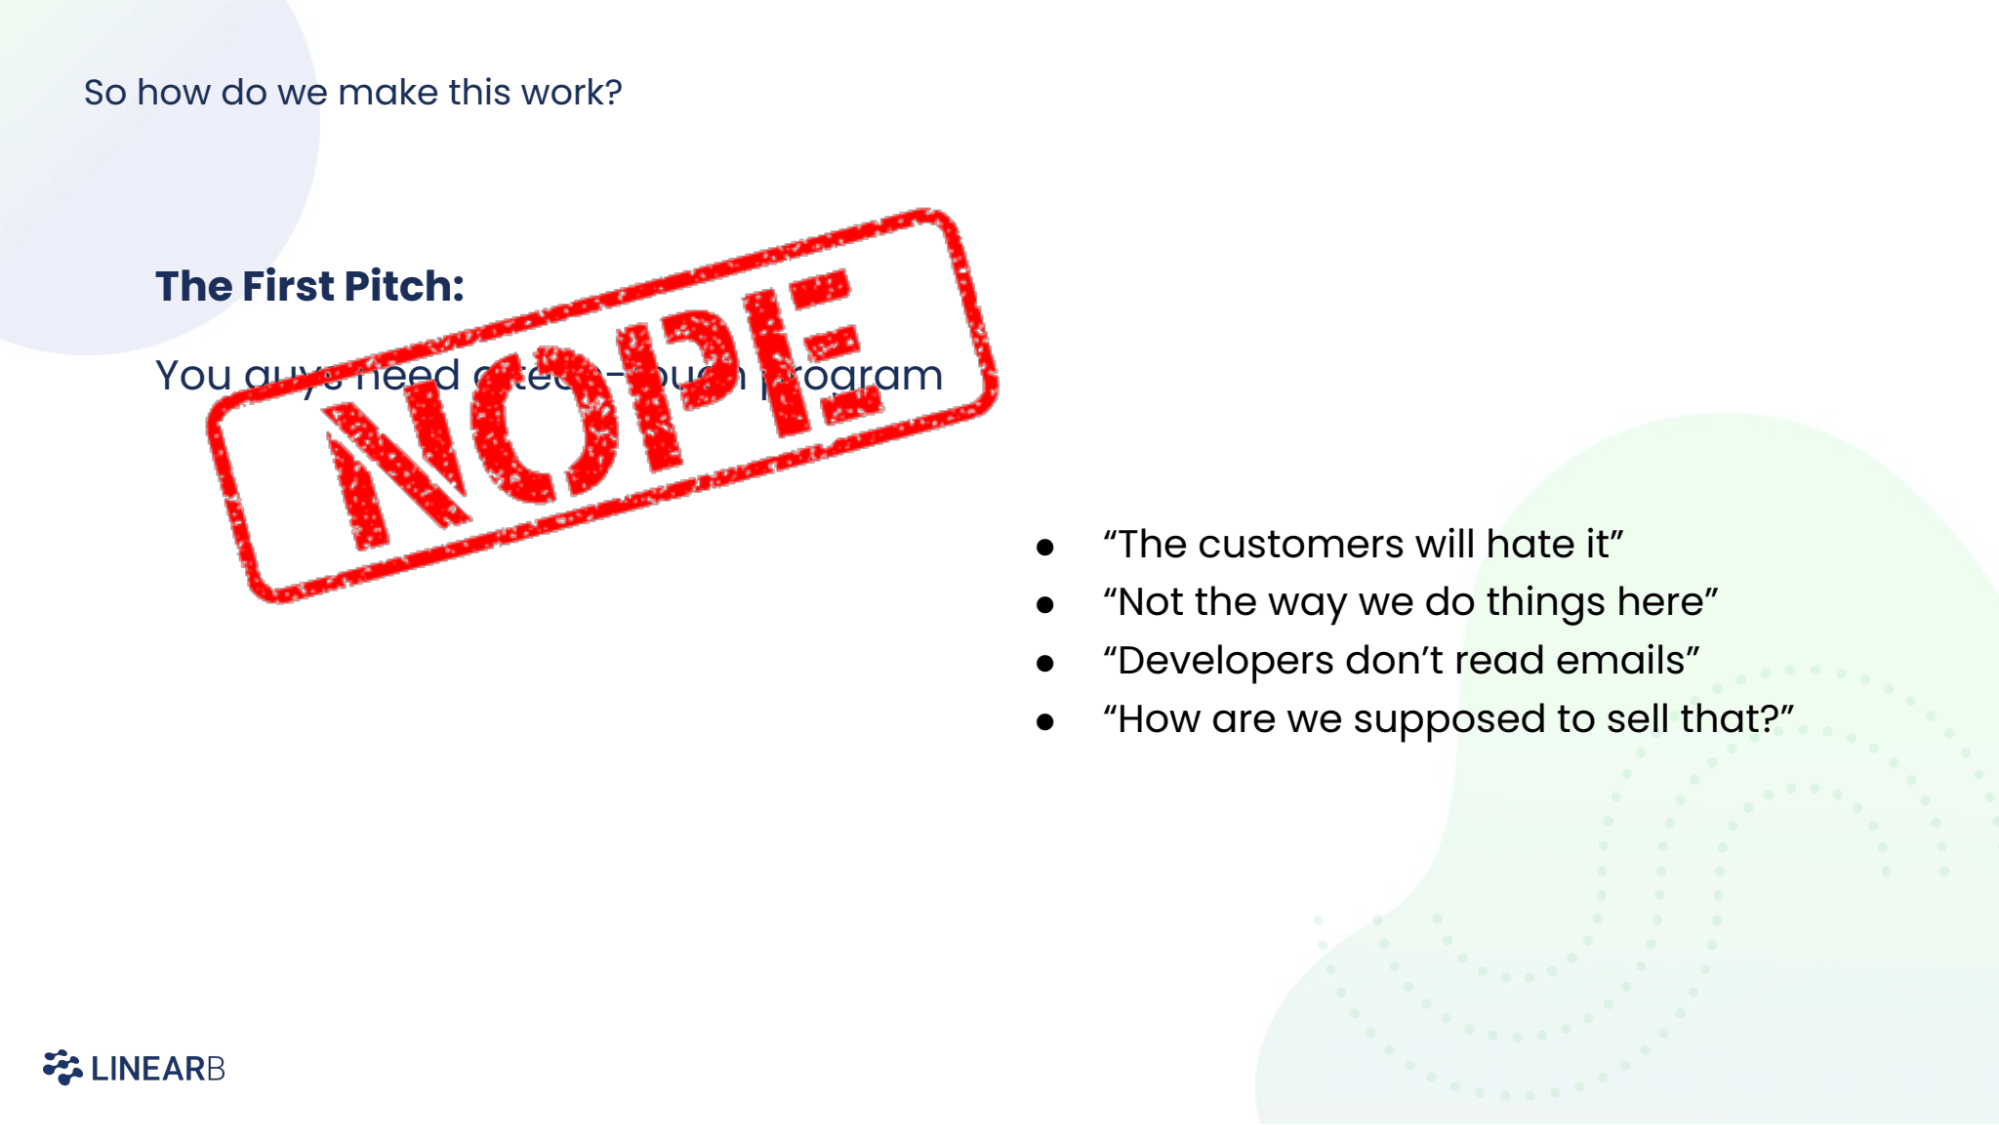 A slide describing how to make this idea work, featuring a large red stamp saying "nope" and bulleted points listing initial critical feedback saying: "the customers will hate it", "not the way we do things here", "developers don't read emails" and "how are we supposed to sell that?"